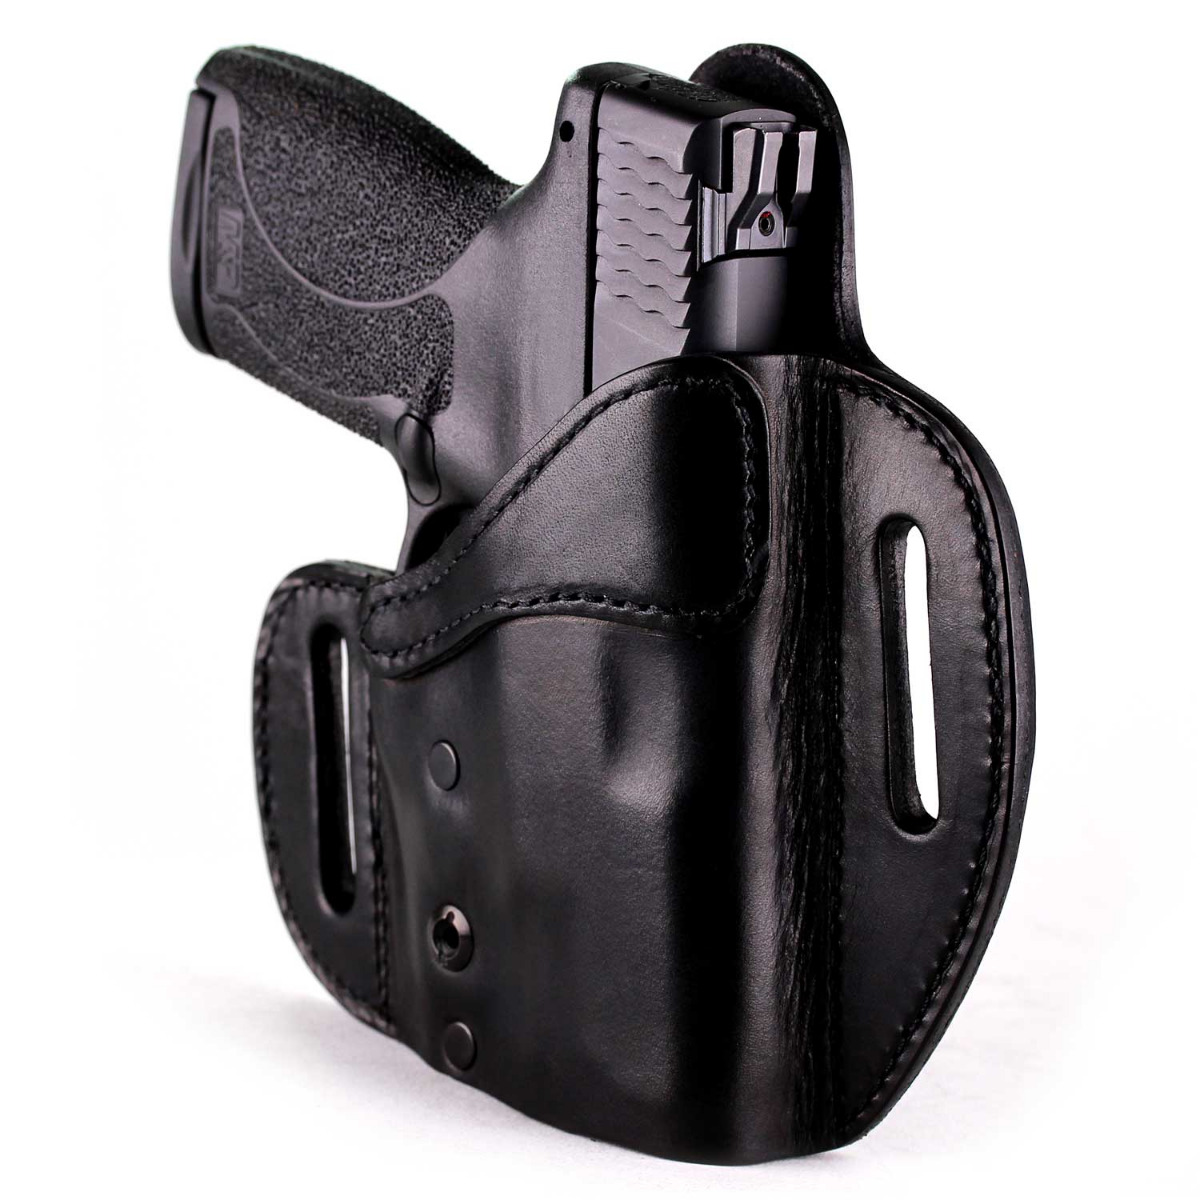 Details about   Small of Back Leather Gun Holster LH RH For BROWNING 1911 22 COMPACT 